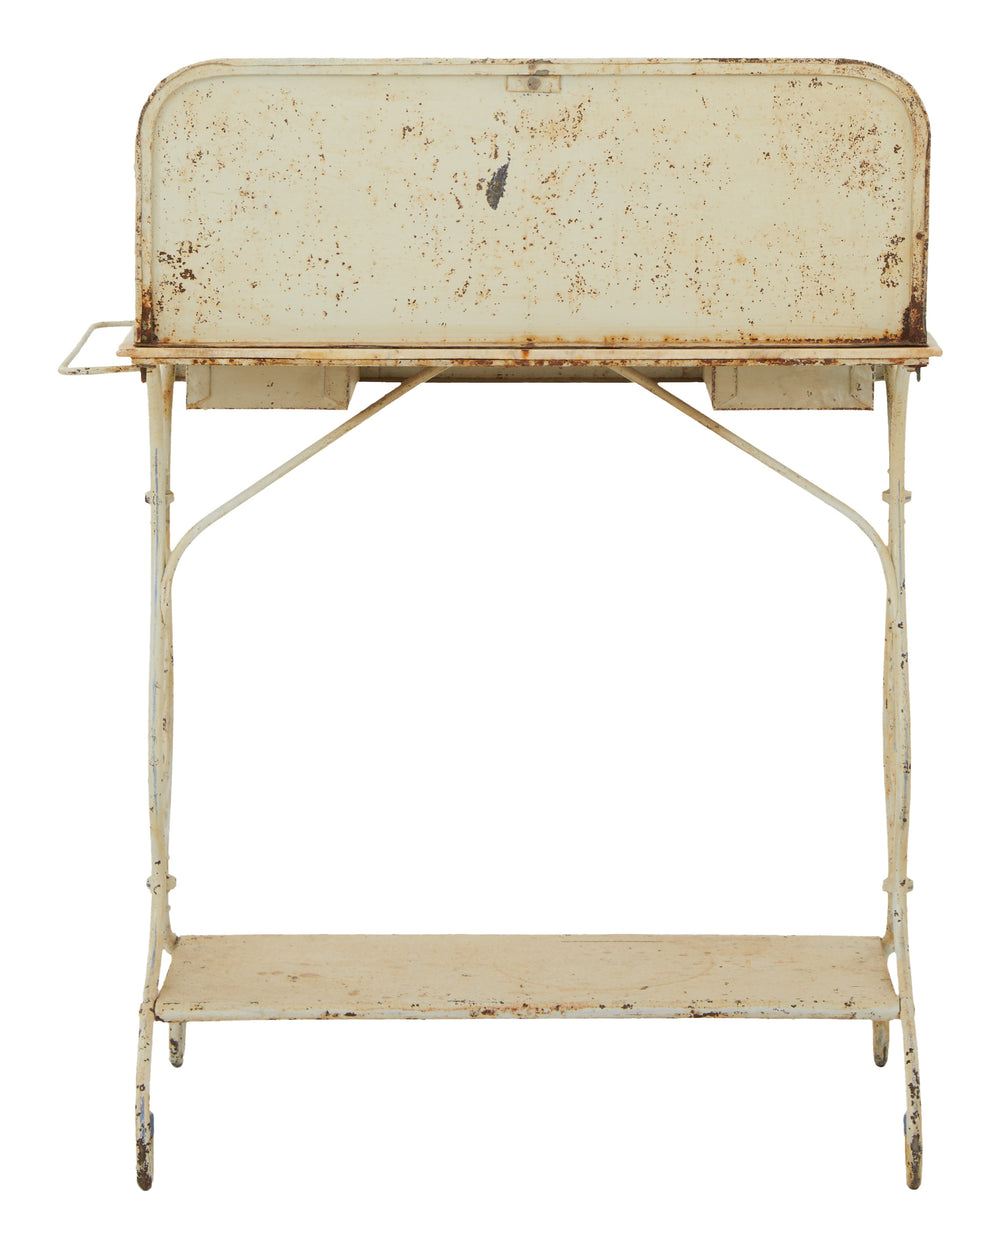 Antique Marble Wash Stand